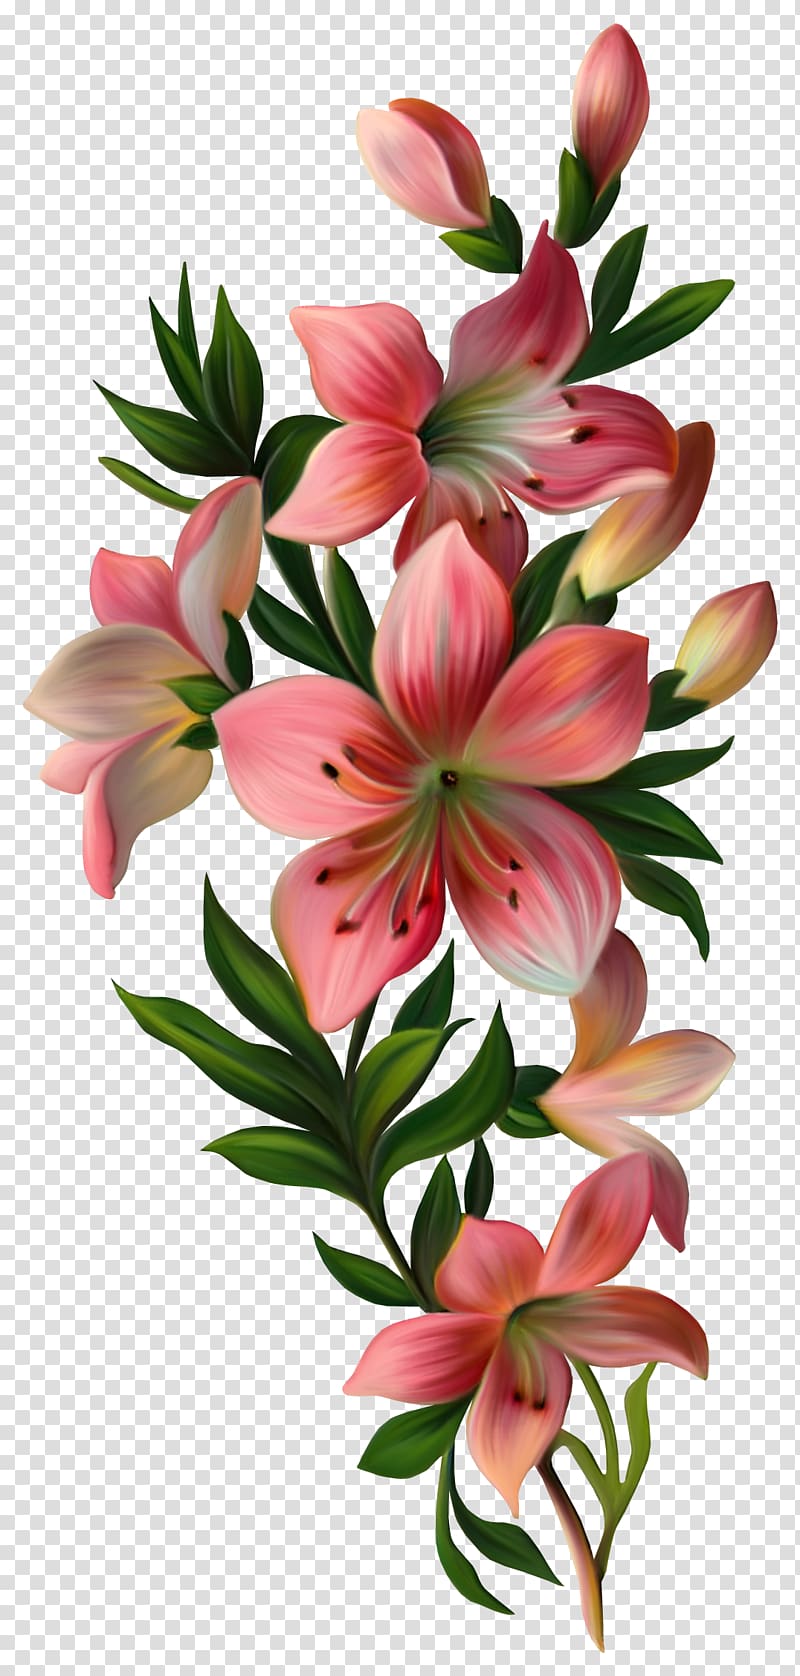 Flower Vintage clothing , lily, pink and green flowers illustration transparent background PNG clipart